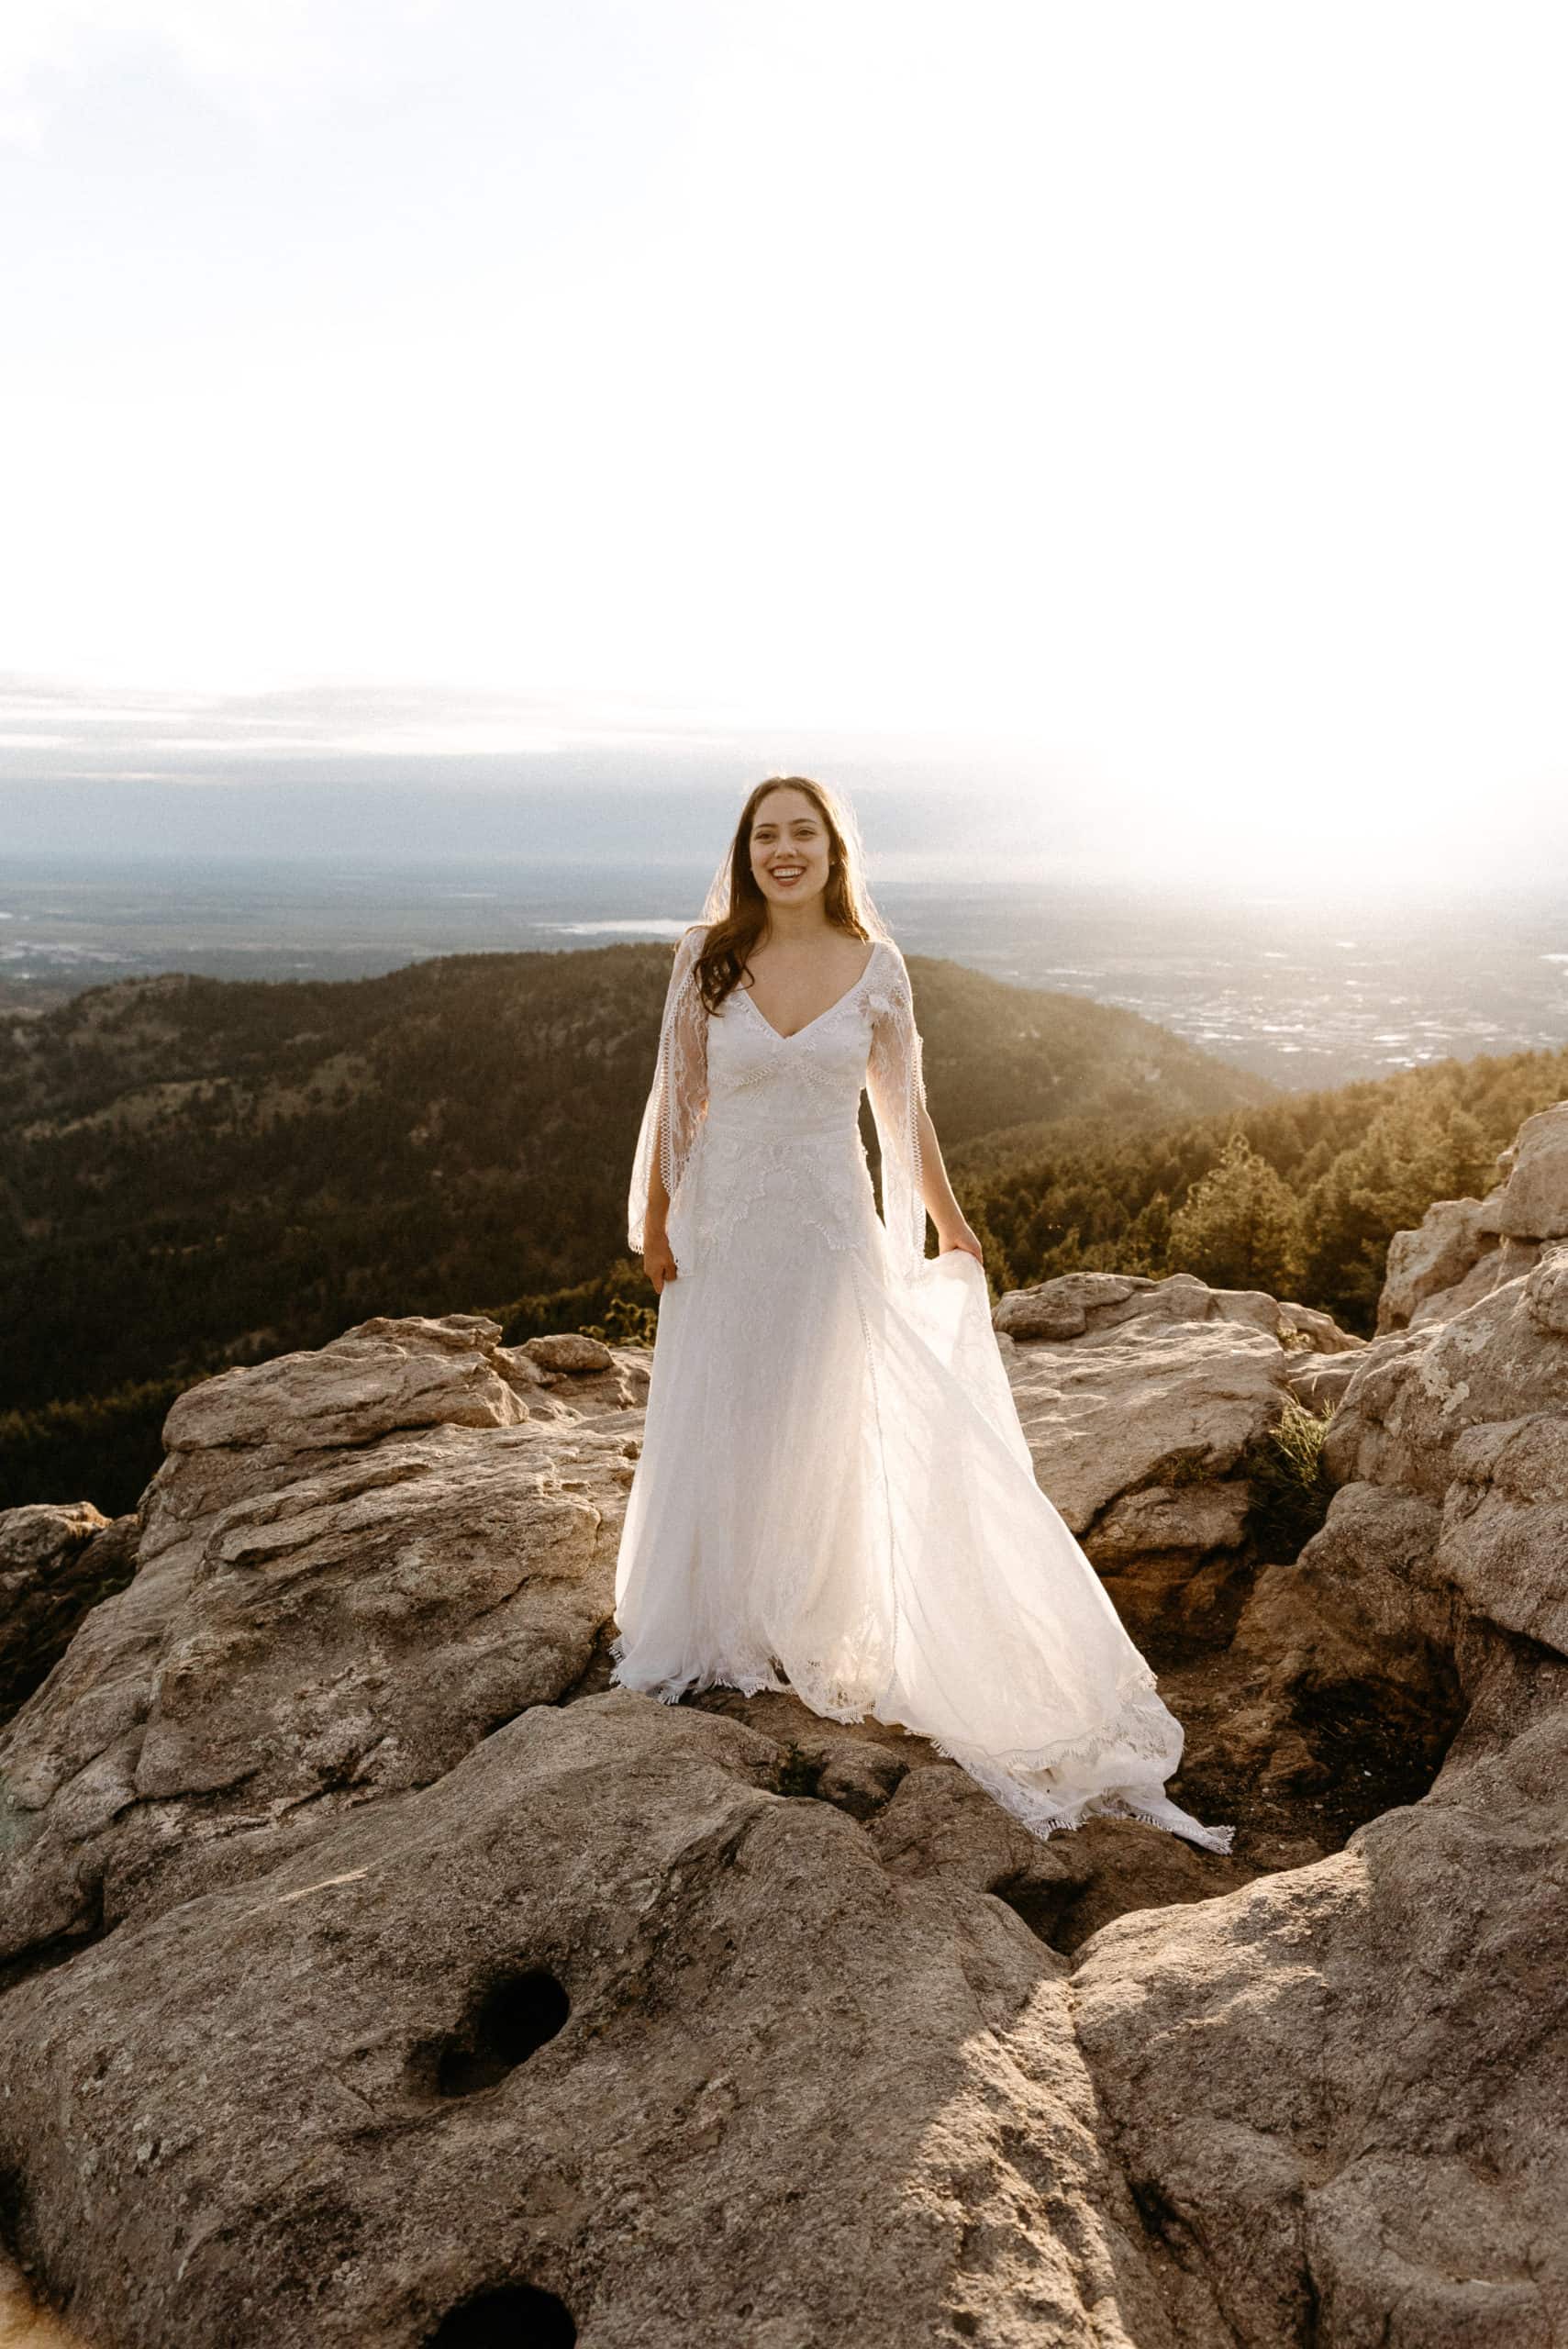 Bride at Sunrise on mountain top in boulder